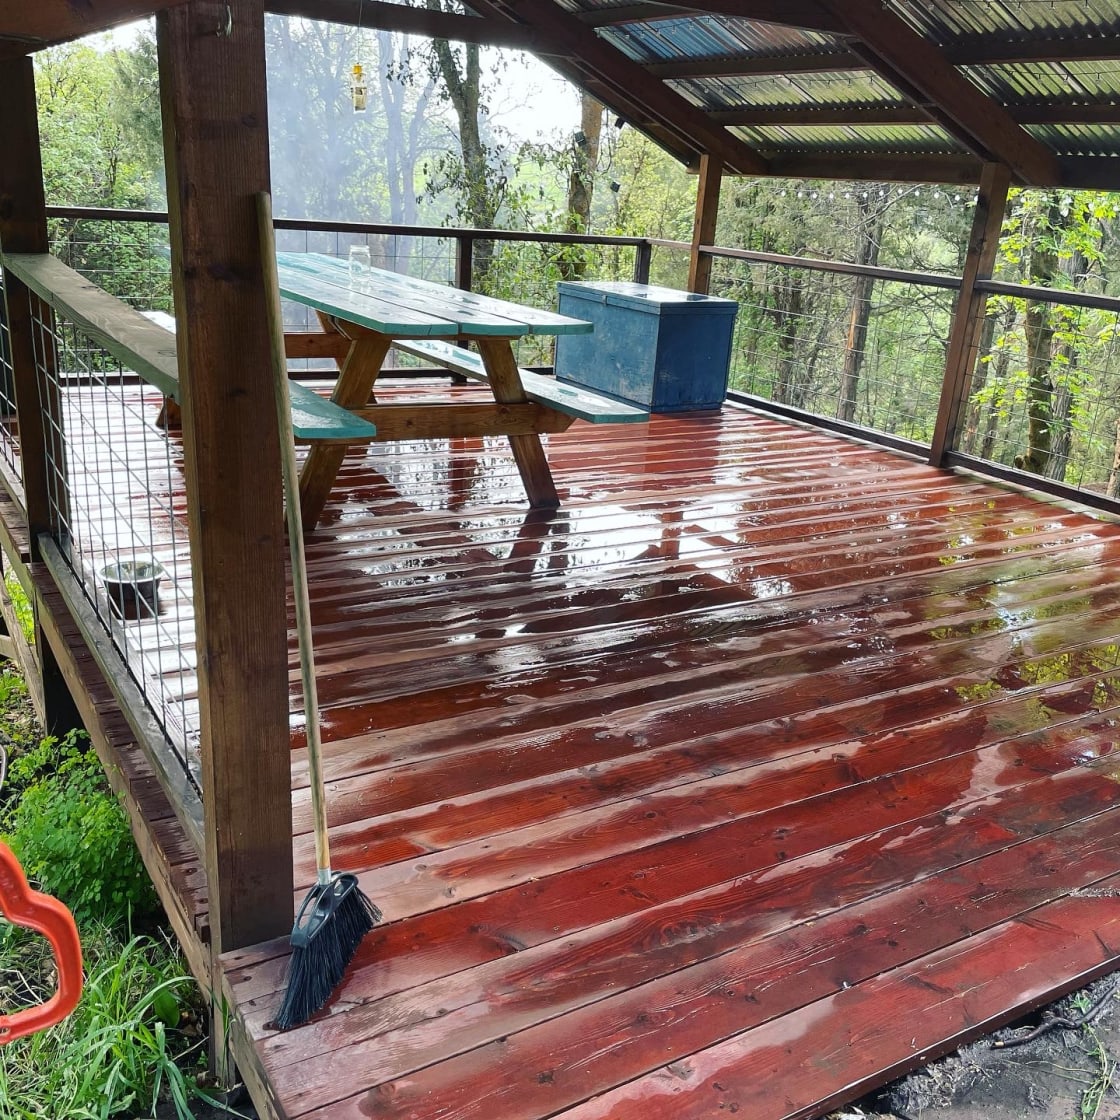 Freshly washed floor with our large picnic table. The blue box has 8 camping chairs, 1 large tent and 4 cots available to rent.